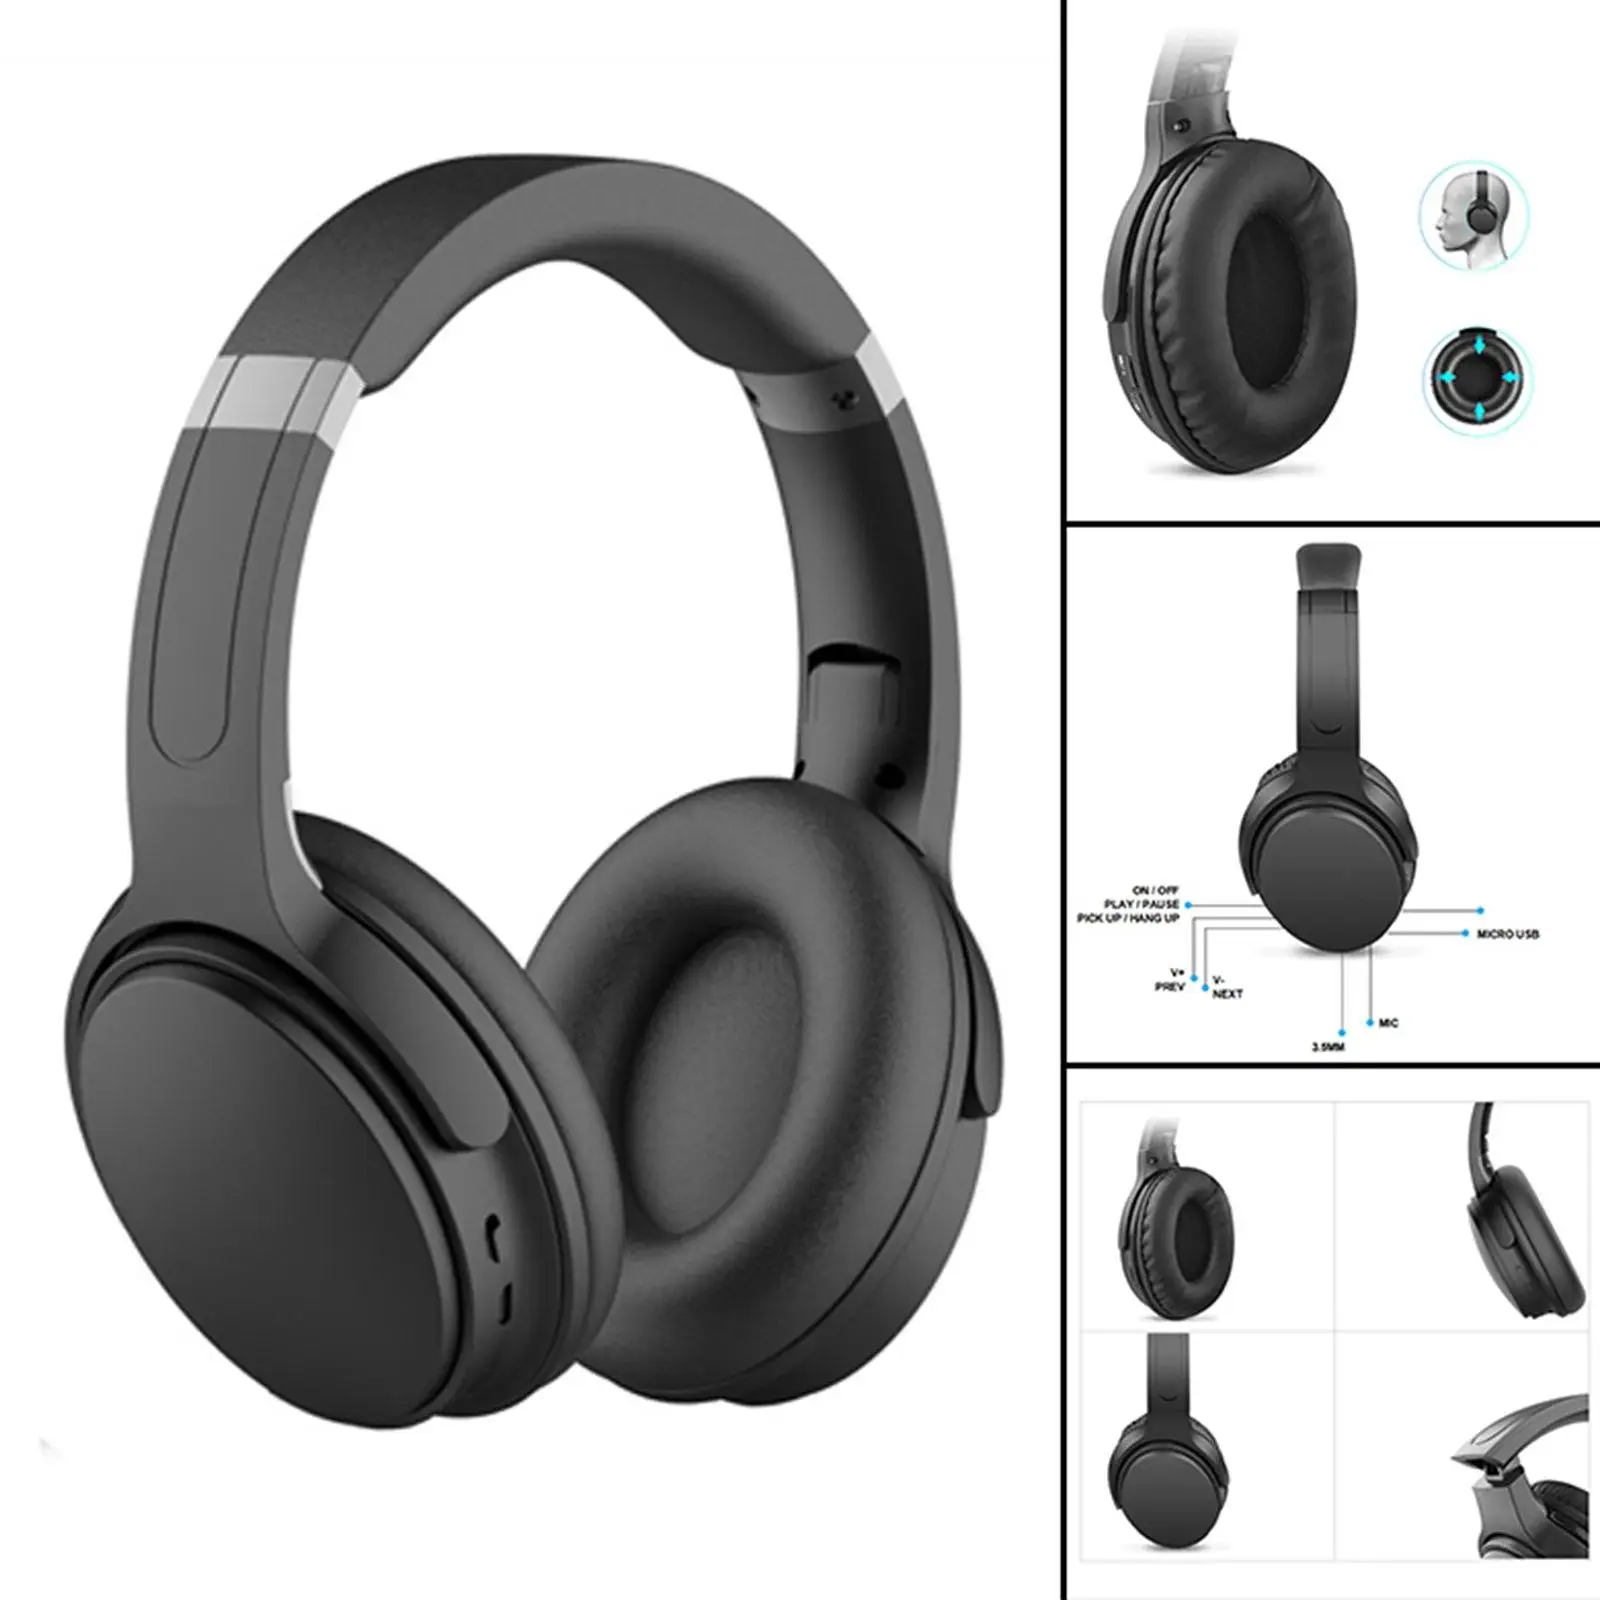  Headset Over Ear Noise Canceling(ANC) Headphones for s Music PC 